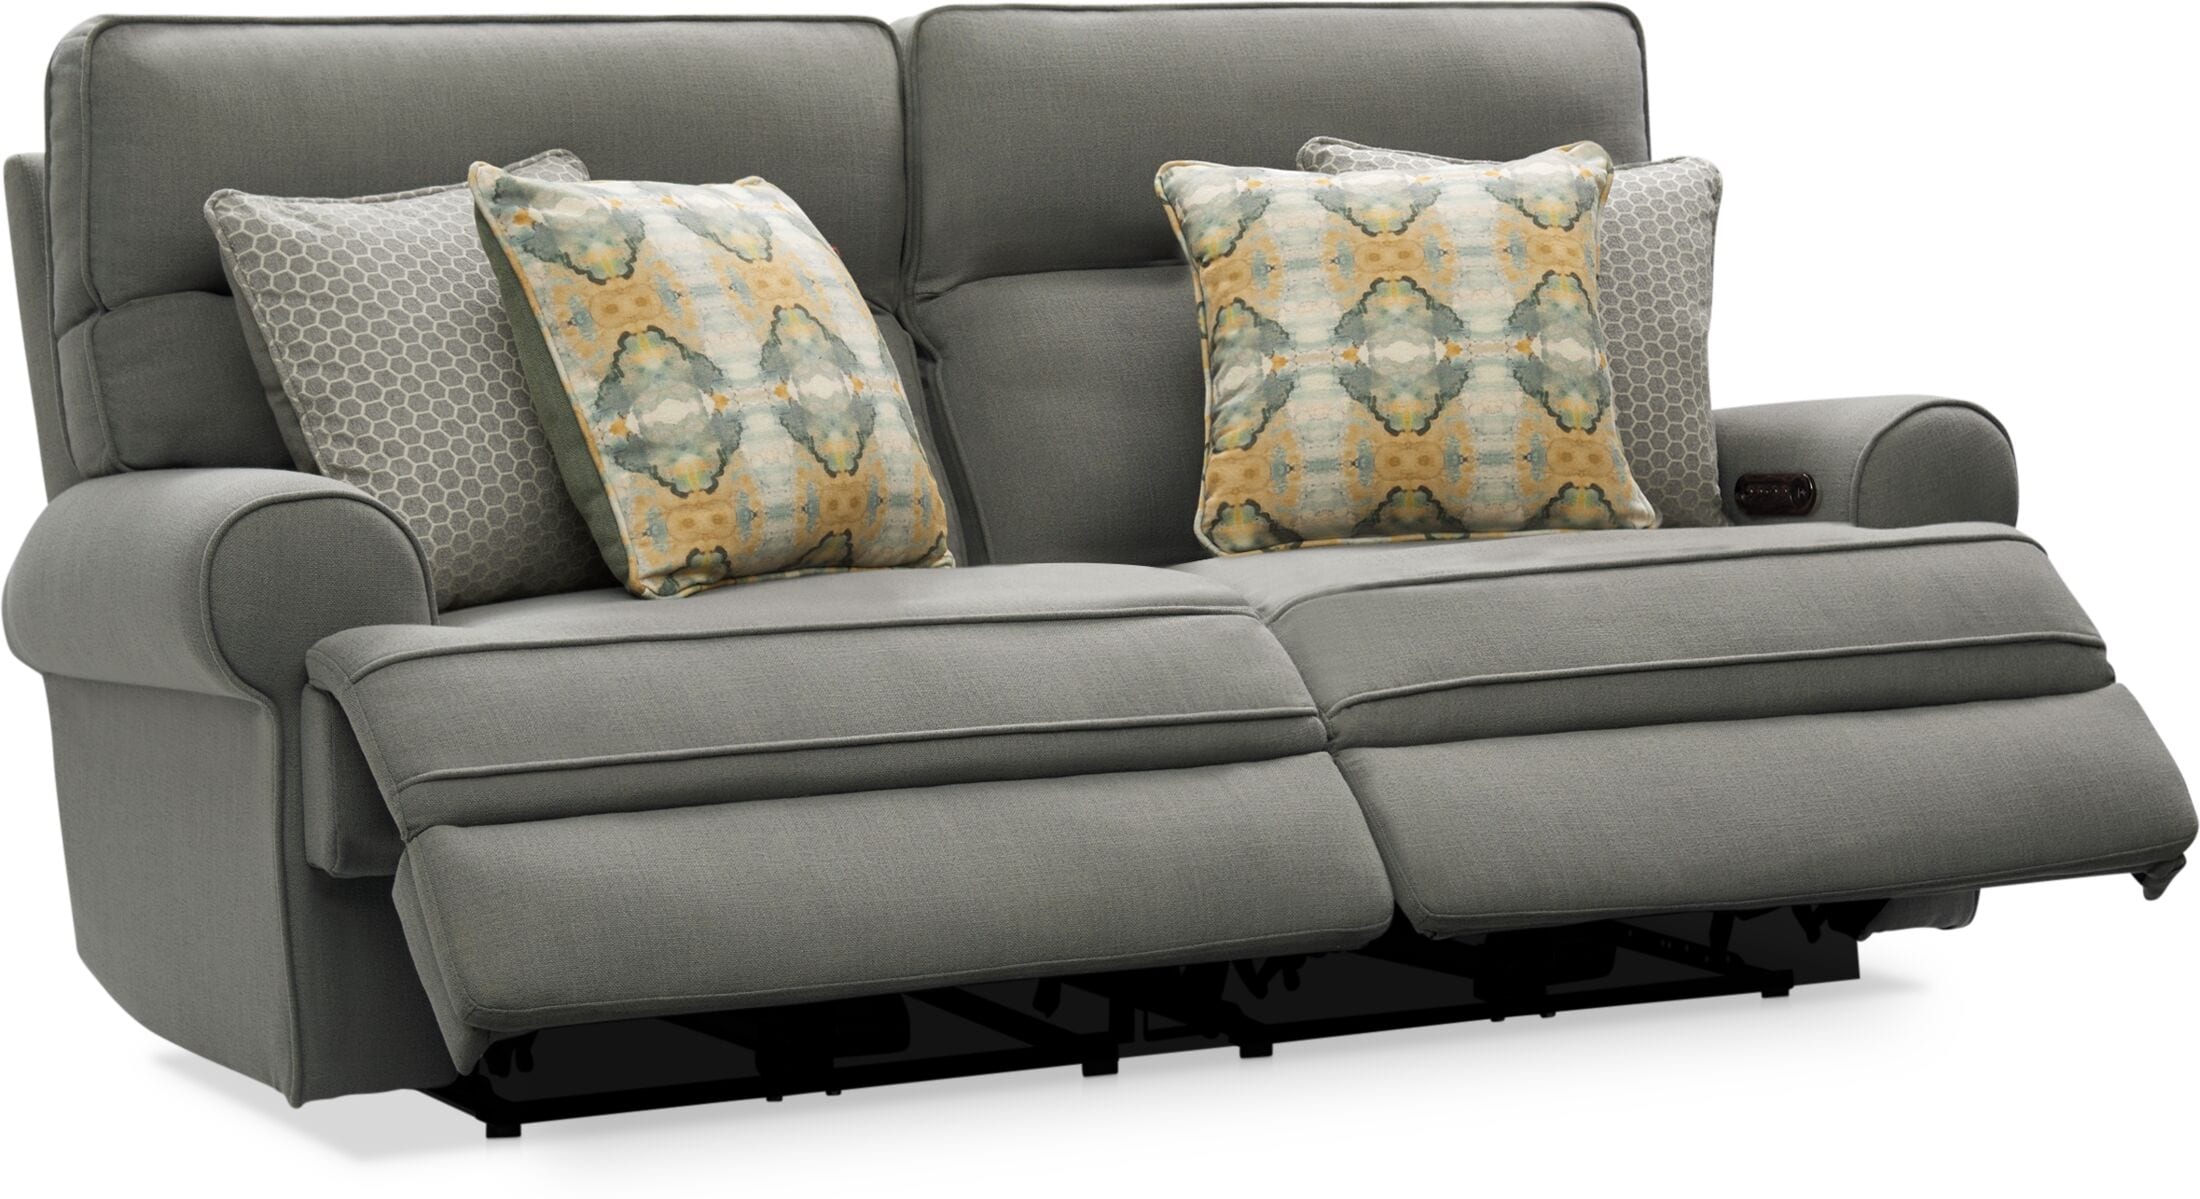 New Brooklyn Fabric Reclining Sofa Set Black and Grey OR Brown and Beige 3 2 Black and Grey